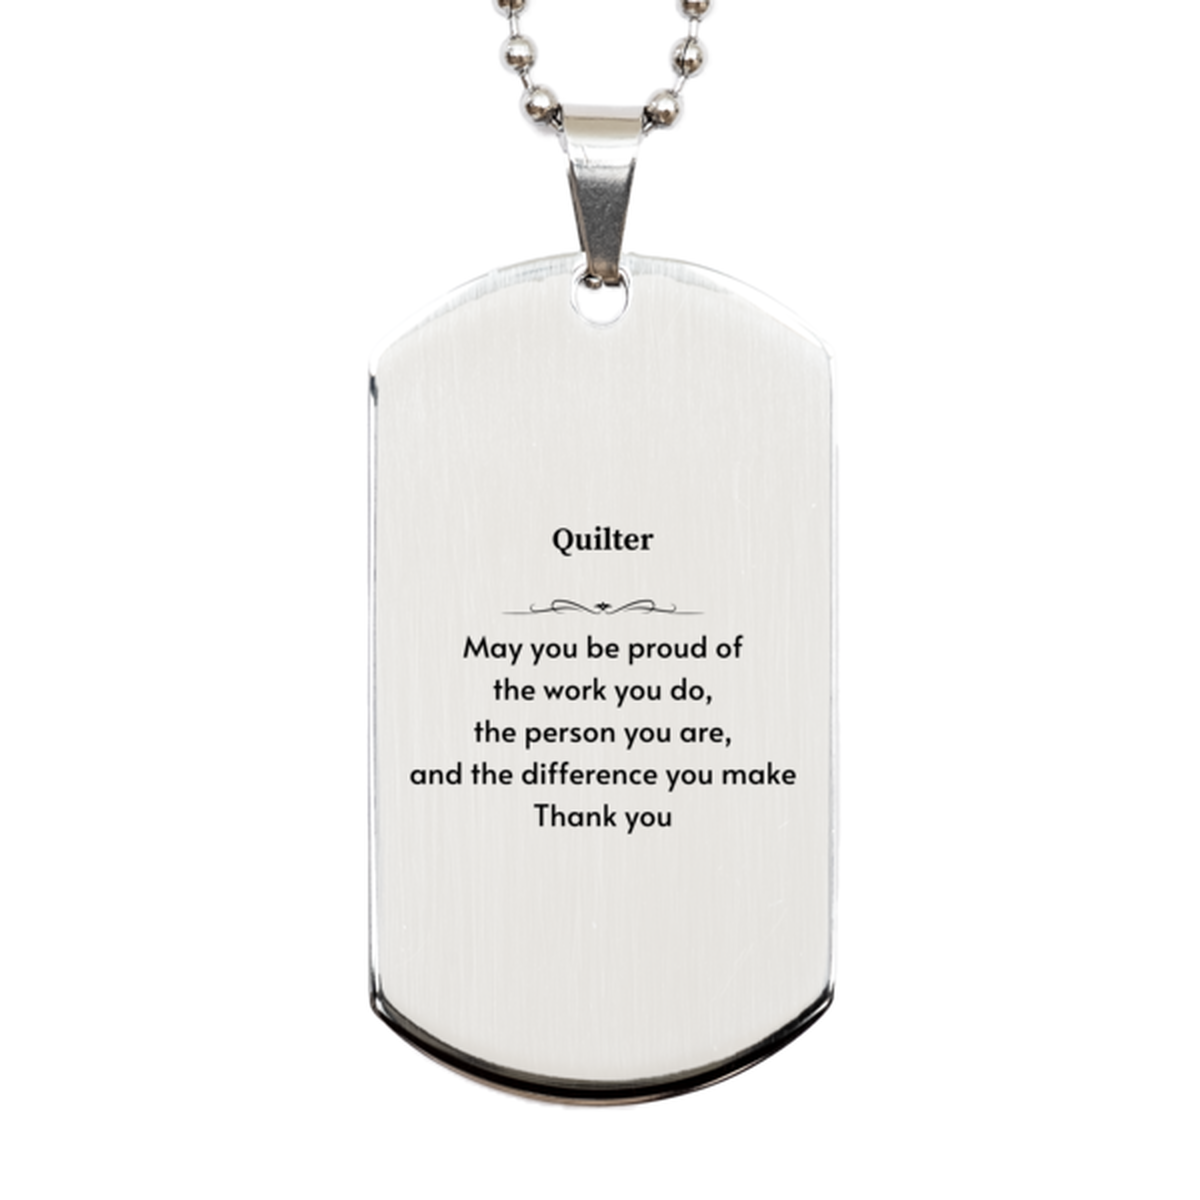 Heartwarming Silver Dog Tag Retirement Coworkers Gifts for Quilter, Quilter May You be proud of the work you do, the person you are Gifts for Boss Men Women Friends